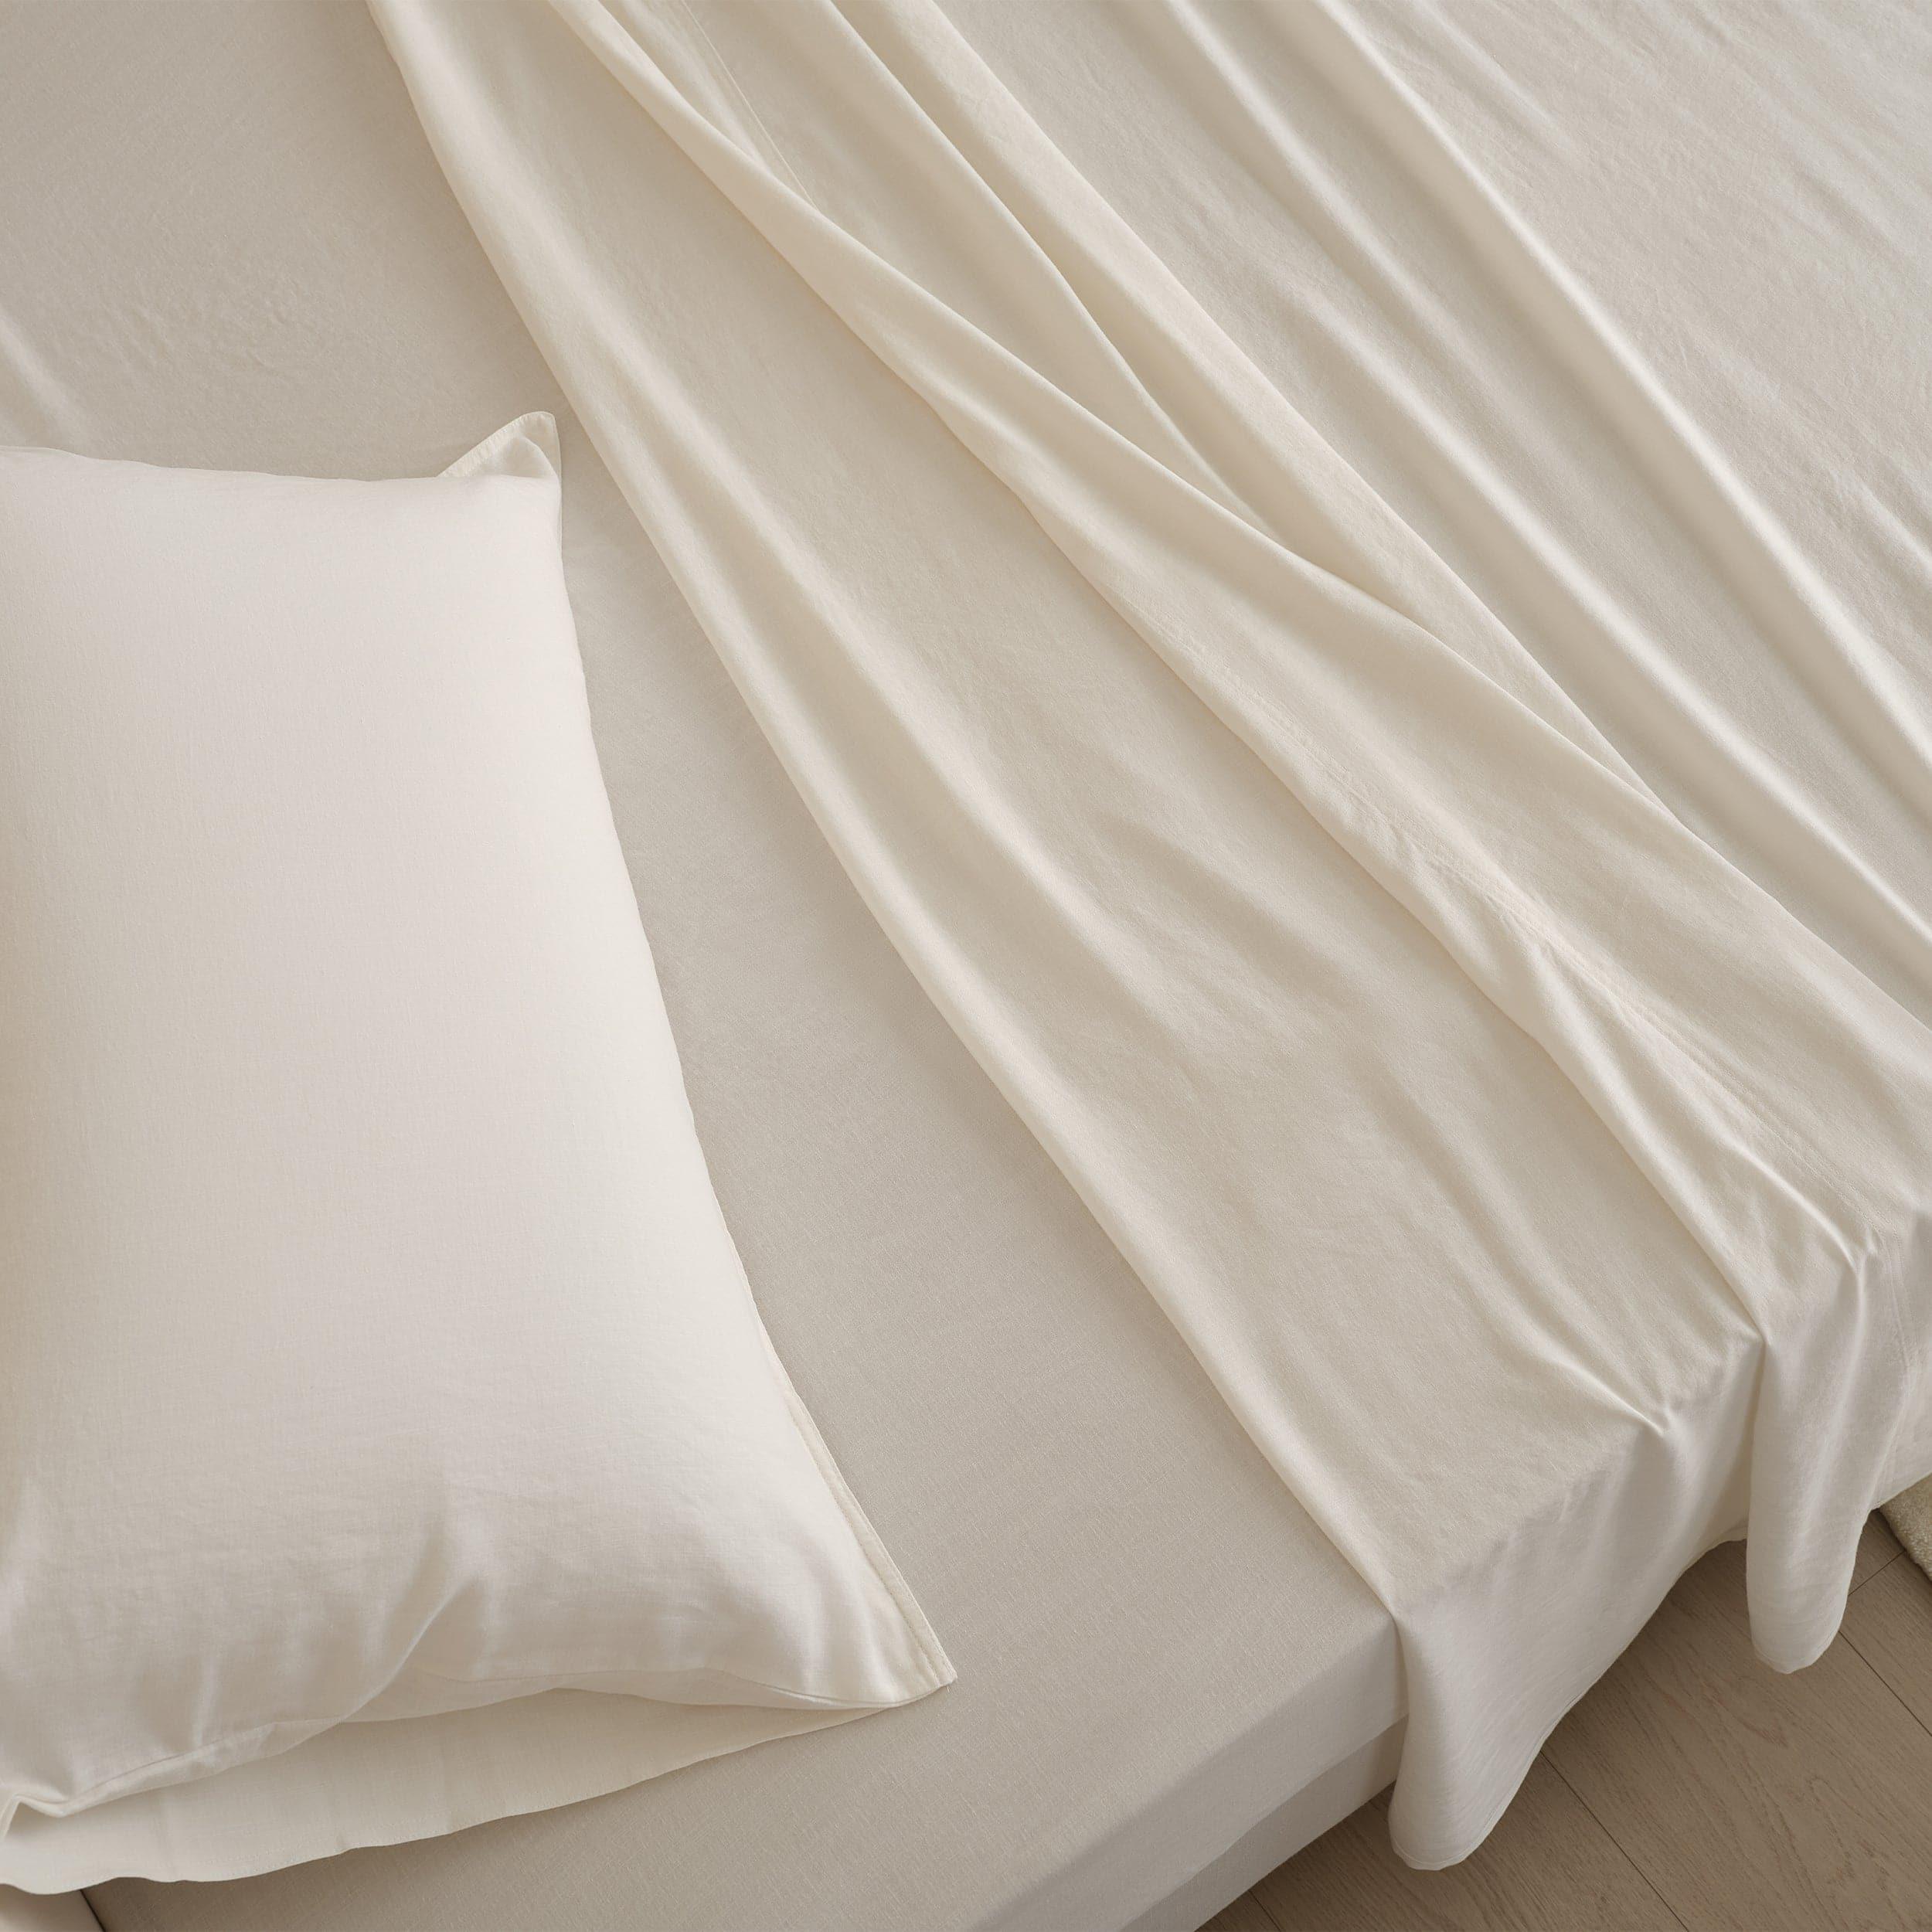 Choose a luxurious sheet set king size to elevate your bedroom decor.